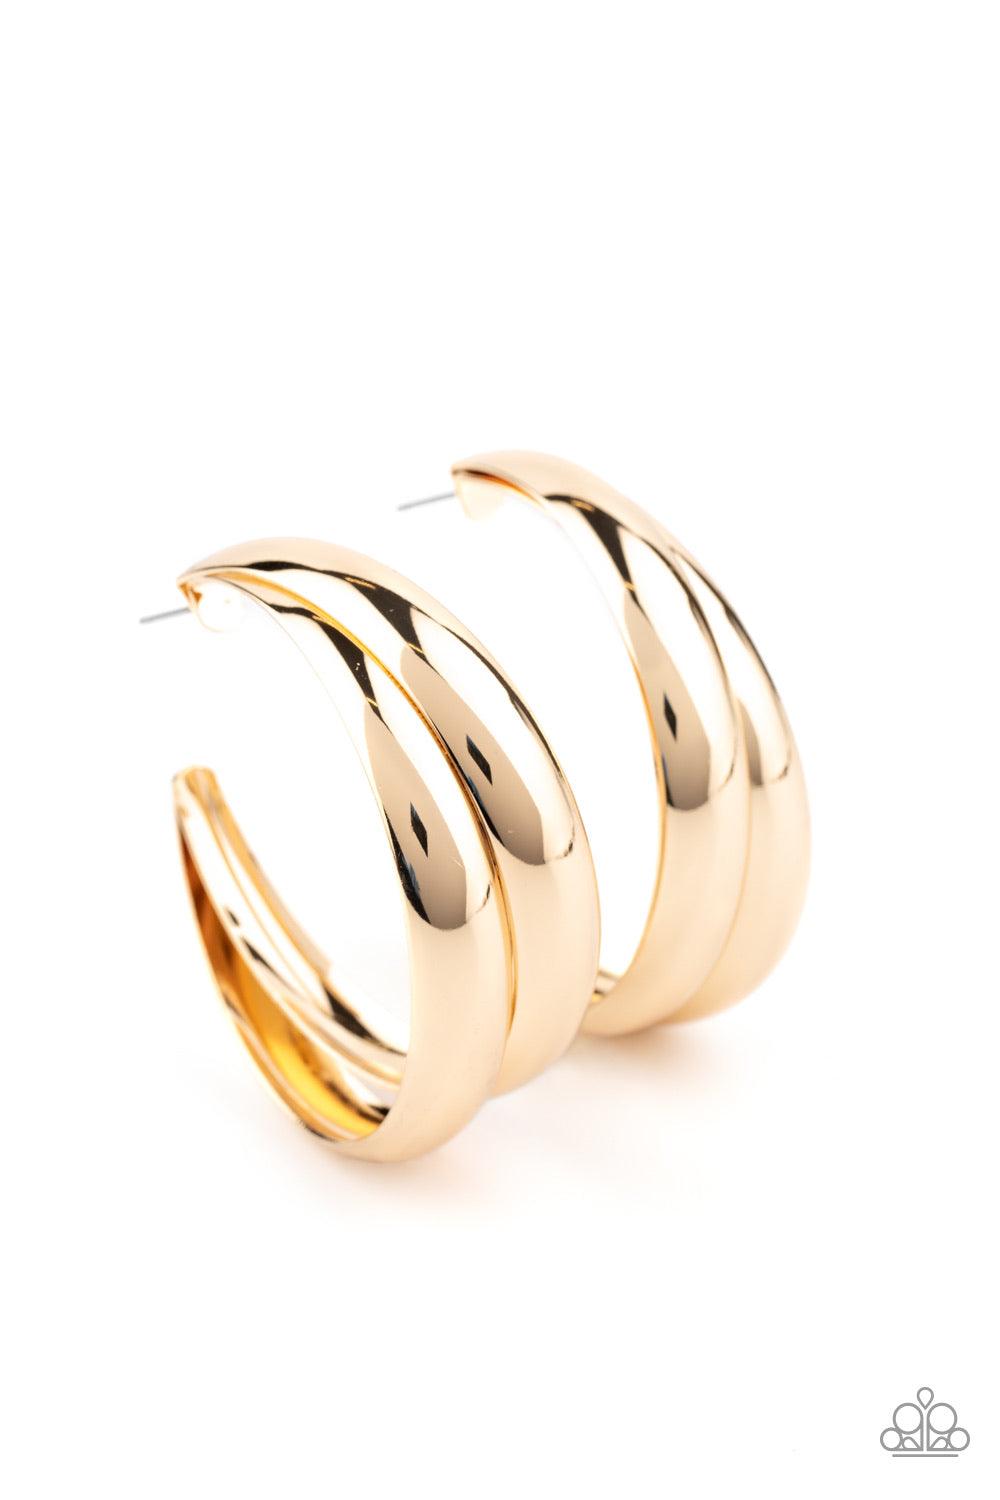 Paparazzi Accessories Colossal Curves - Gold Two thick gold bars delicately overlap into a boldly oversized hoop. Earring attaches to a standard post fitting. Hoop measures approximately 2" in diameter. Sold as one pair of hoop earrings. Jewelry